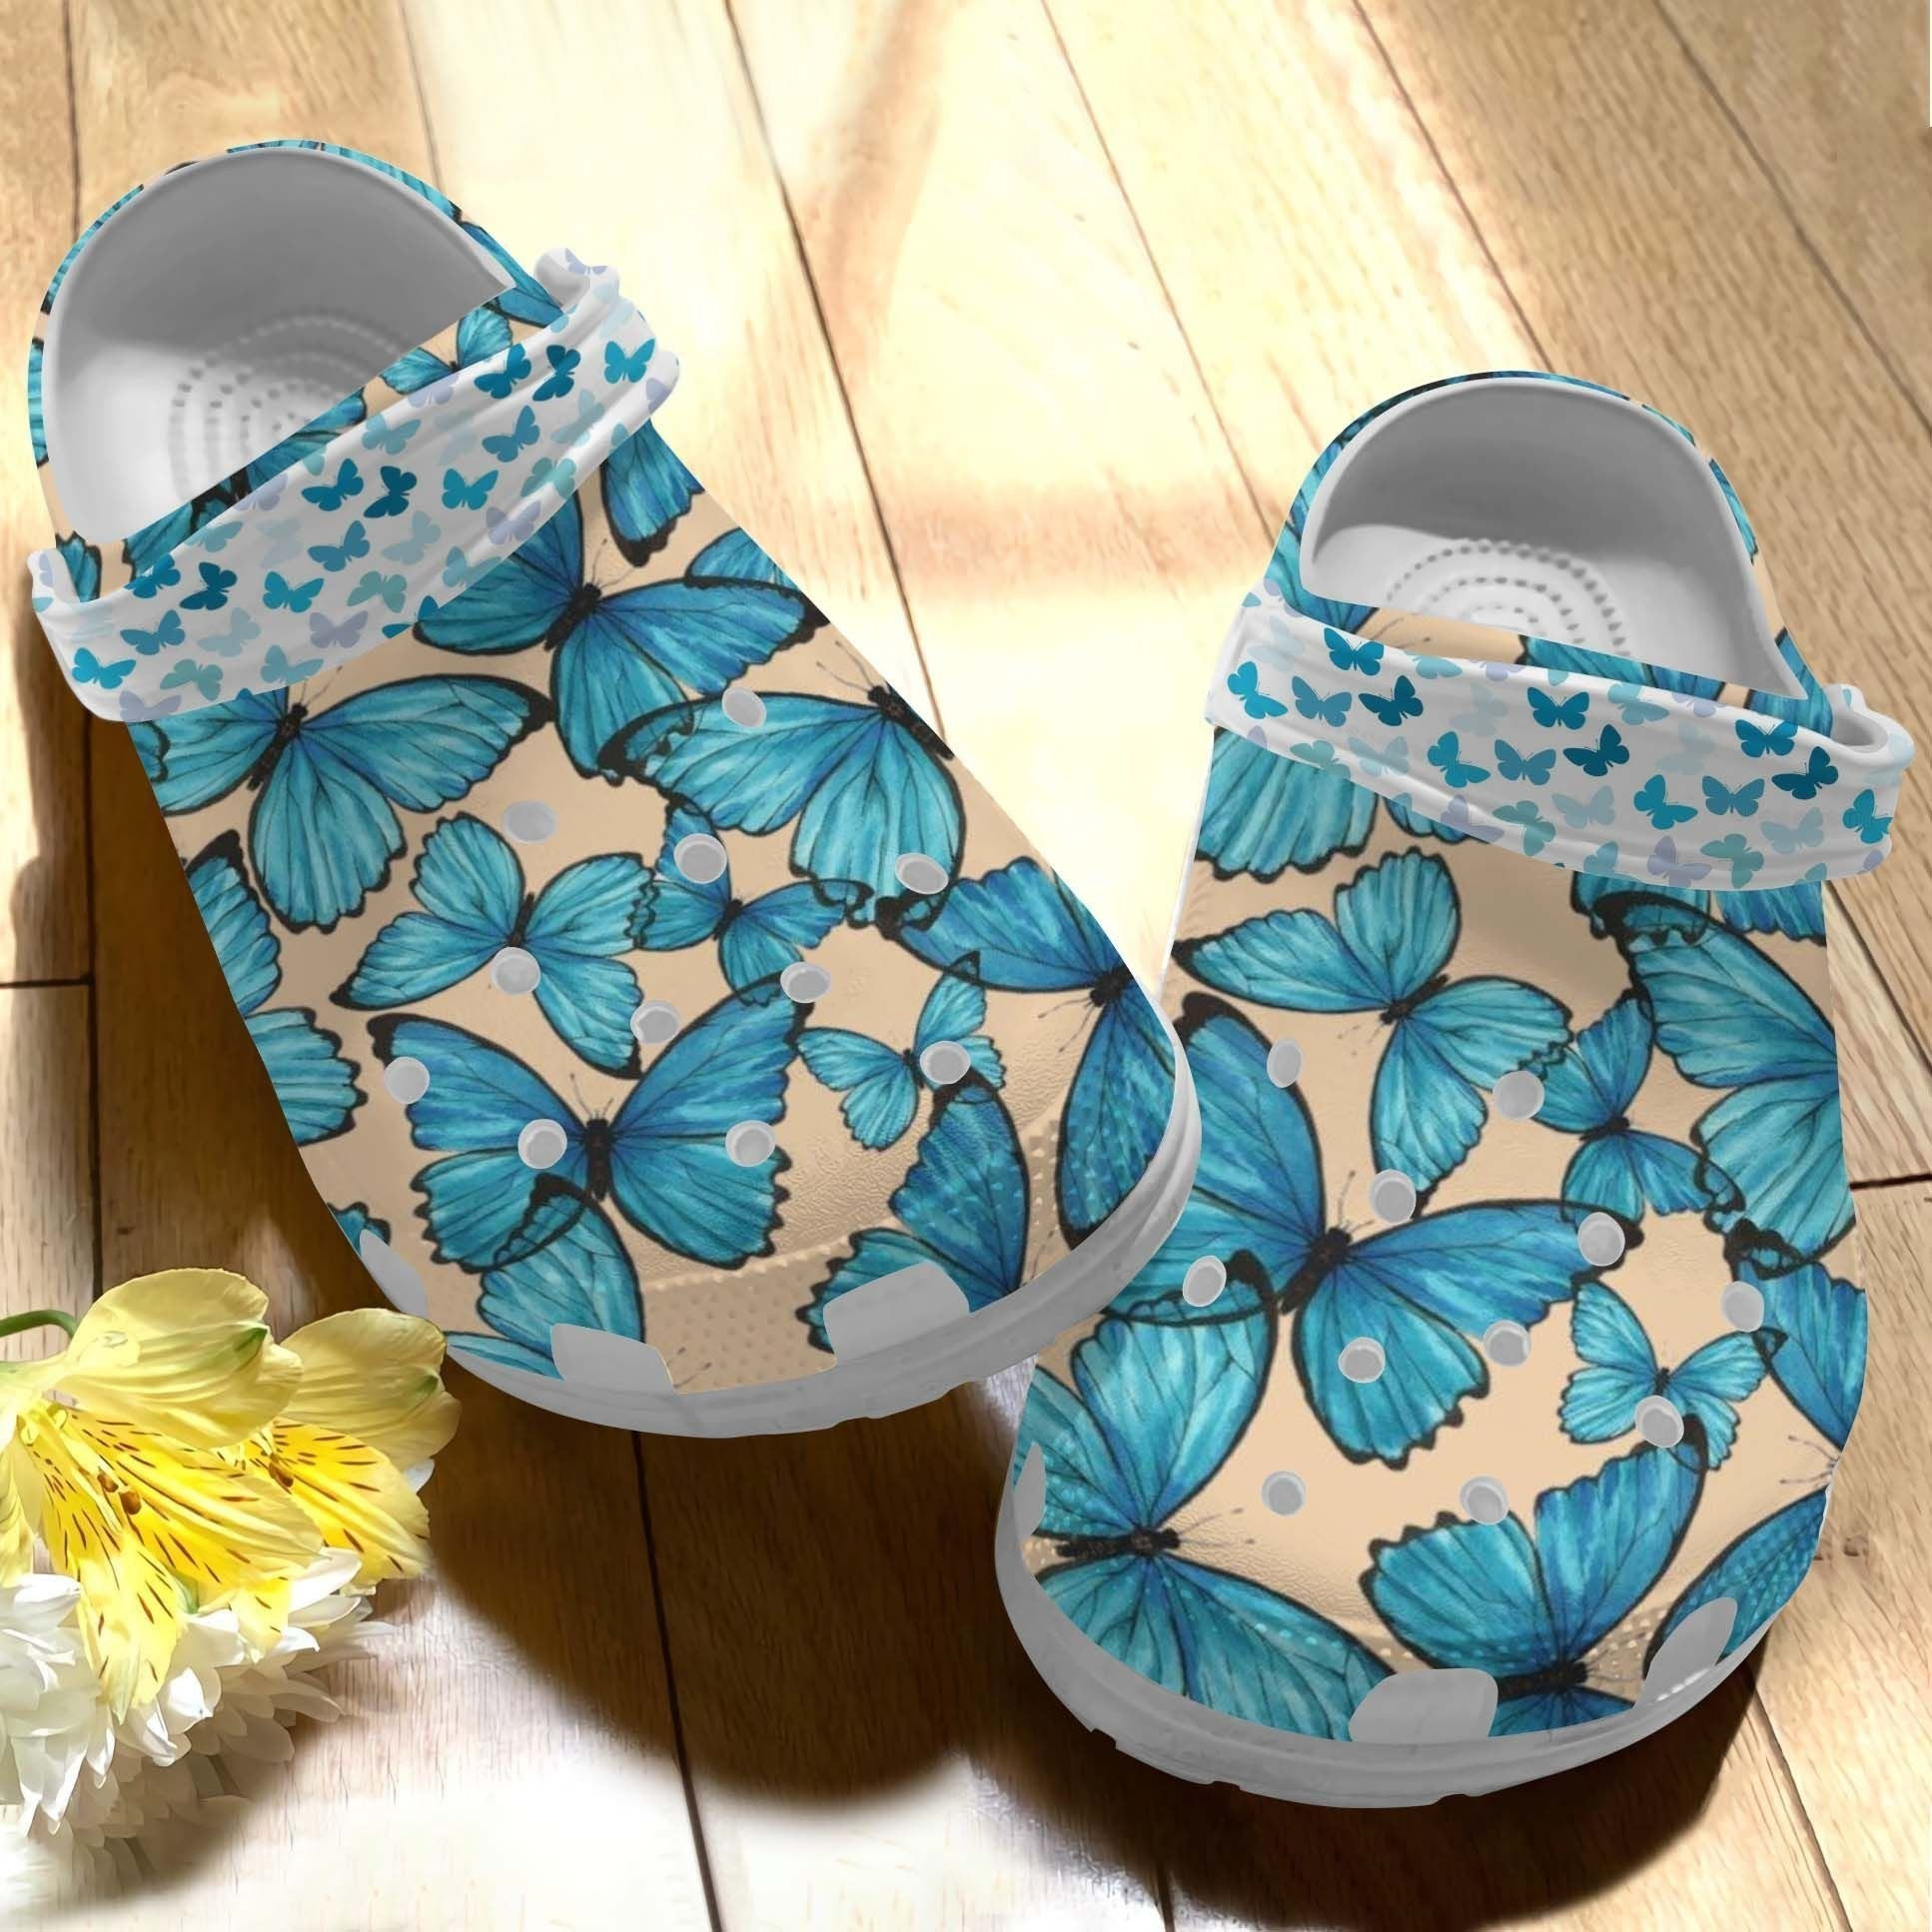 Full Of Butterflies Shoes Clog Crocs Gifts For Mother Day Grandma